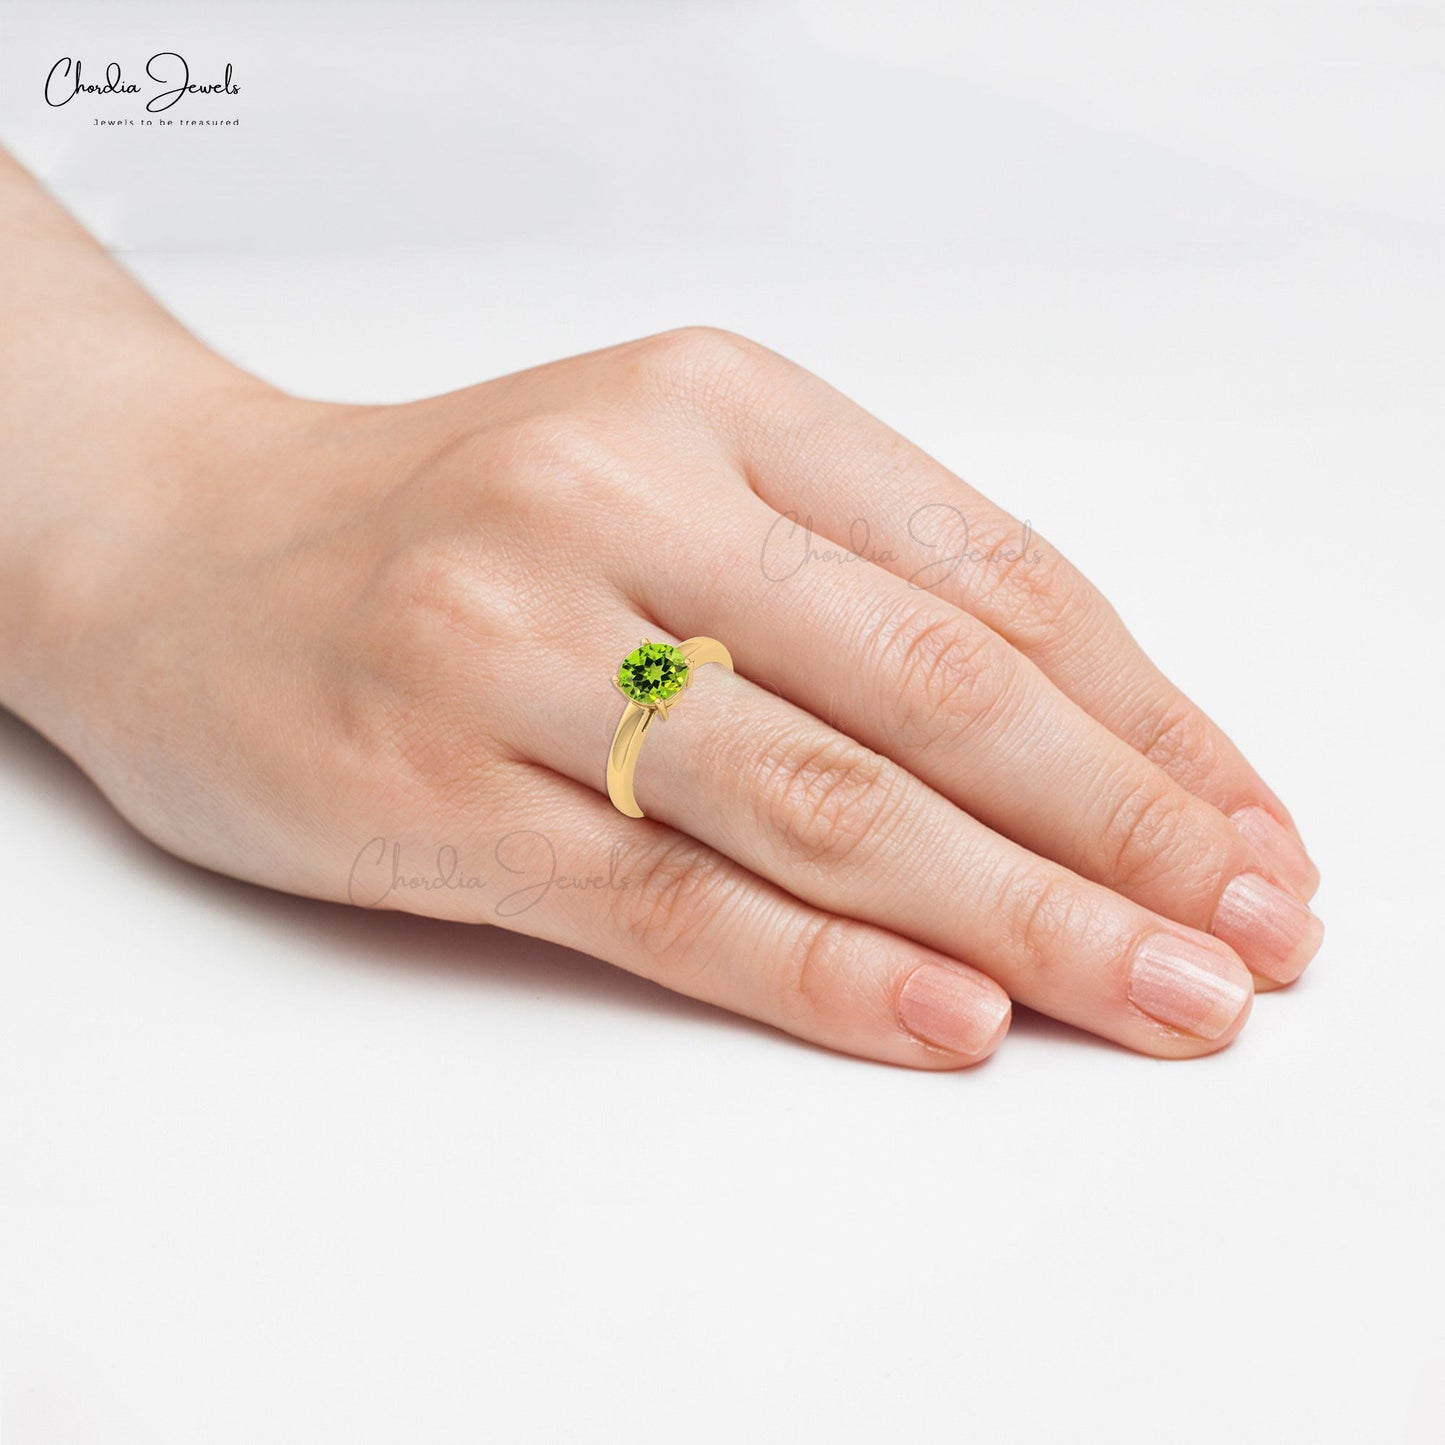 Genuine 6mm Round Cut Green Peridot Solitaire Ring, 14k Solid Gold Gemstone Dainty Ring For Birthday Gift